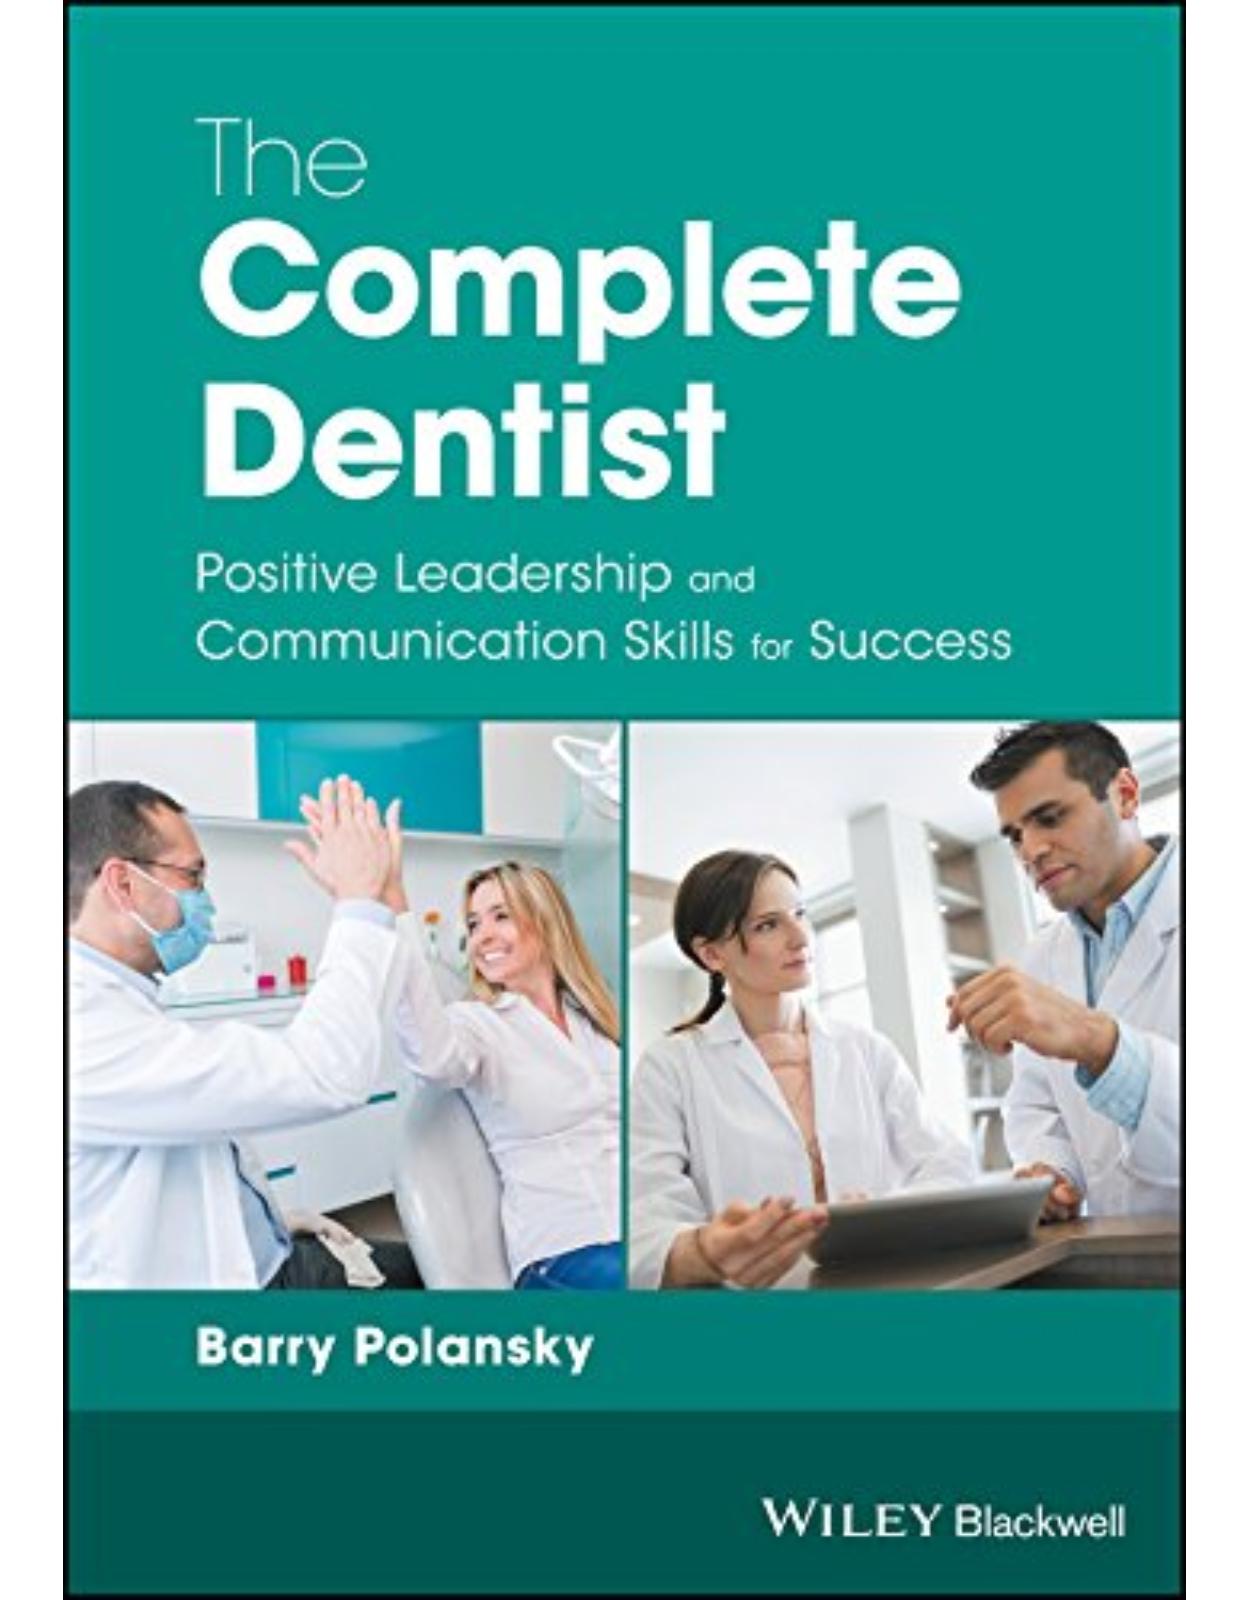 The Complete Dentist: Positive Leadership and Communication Skills for Success